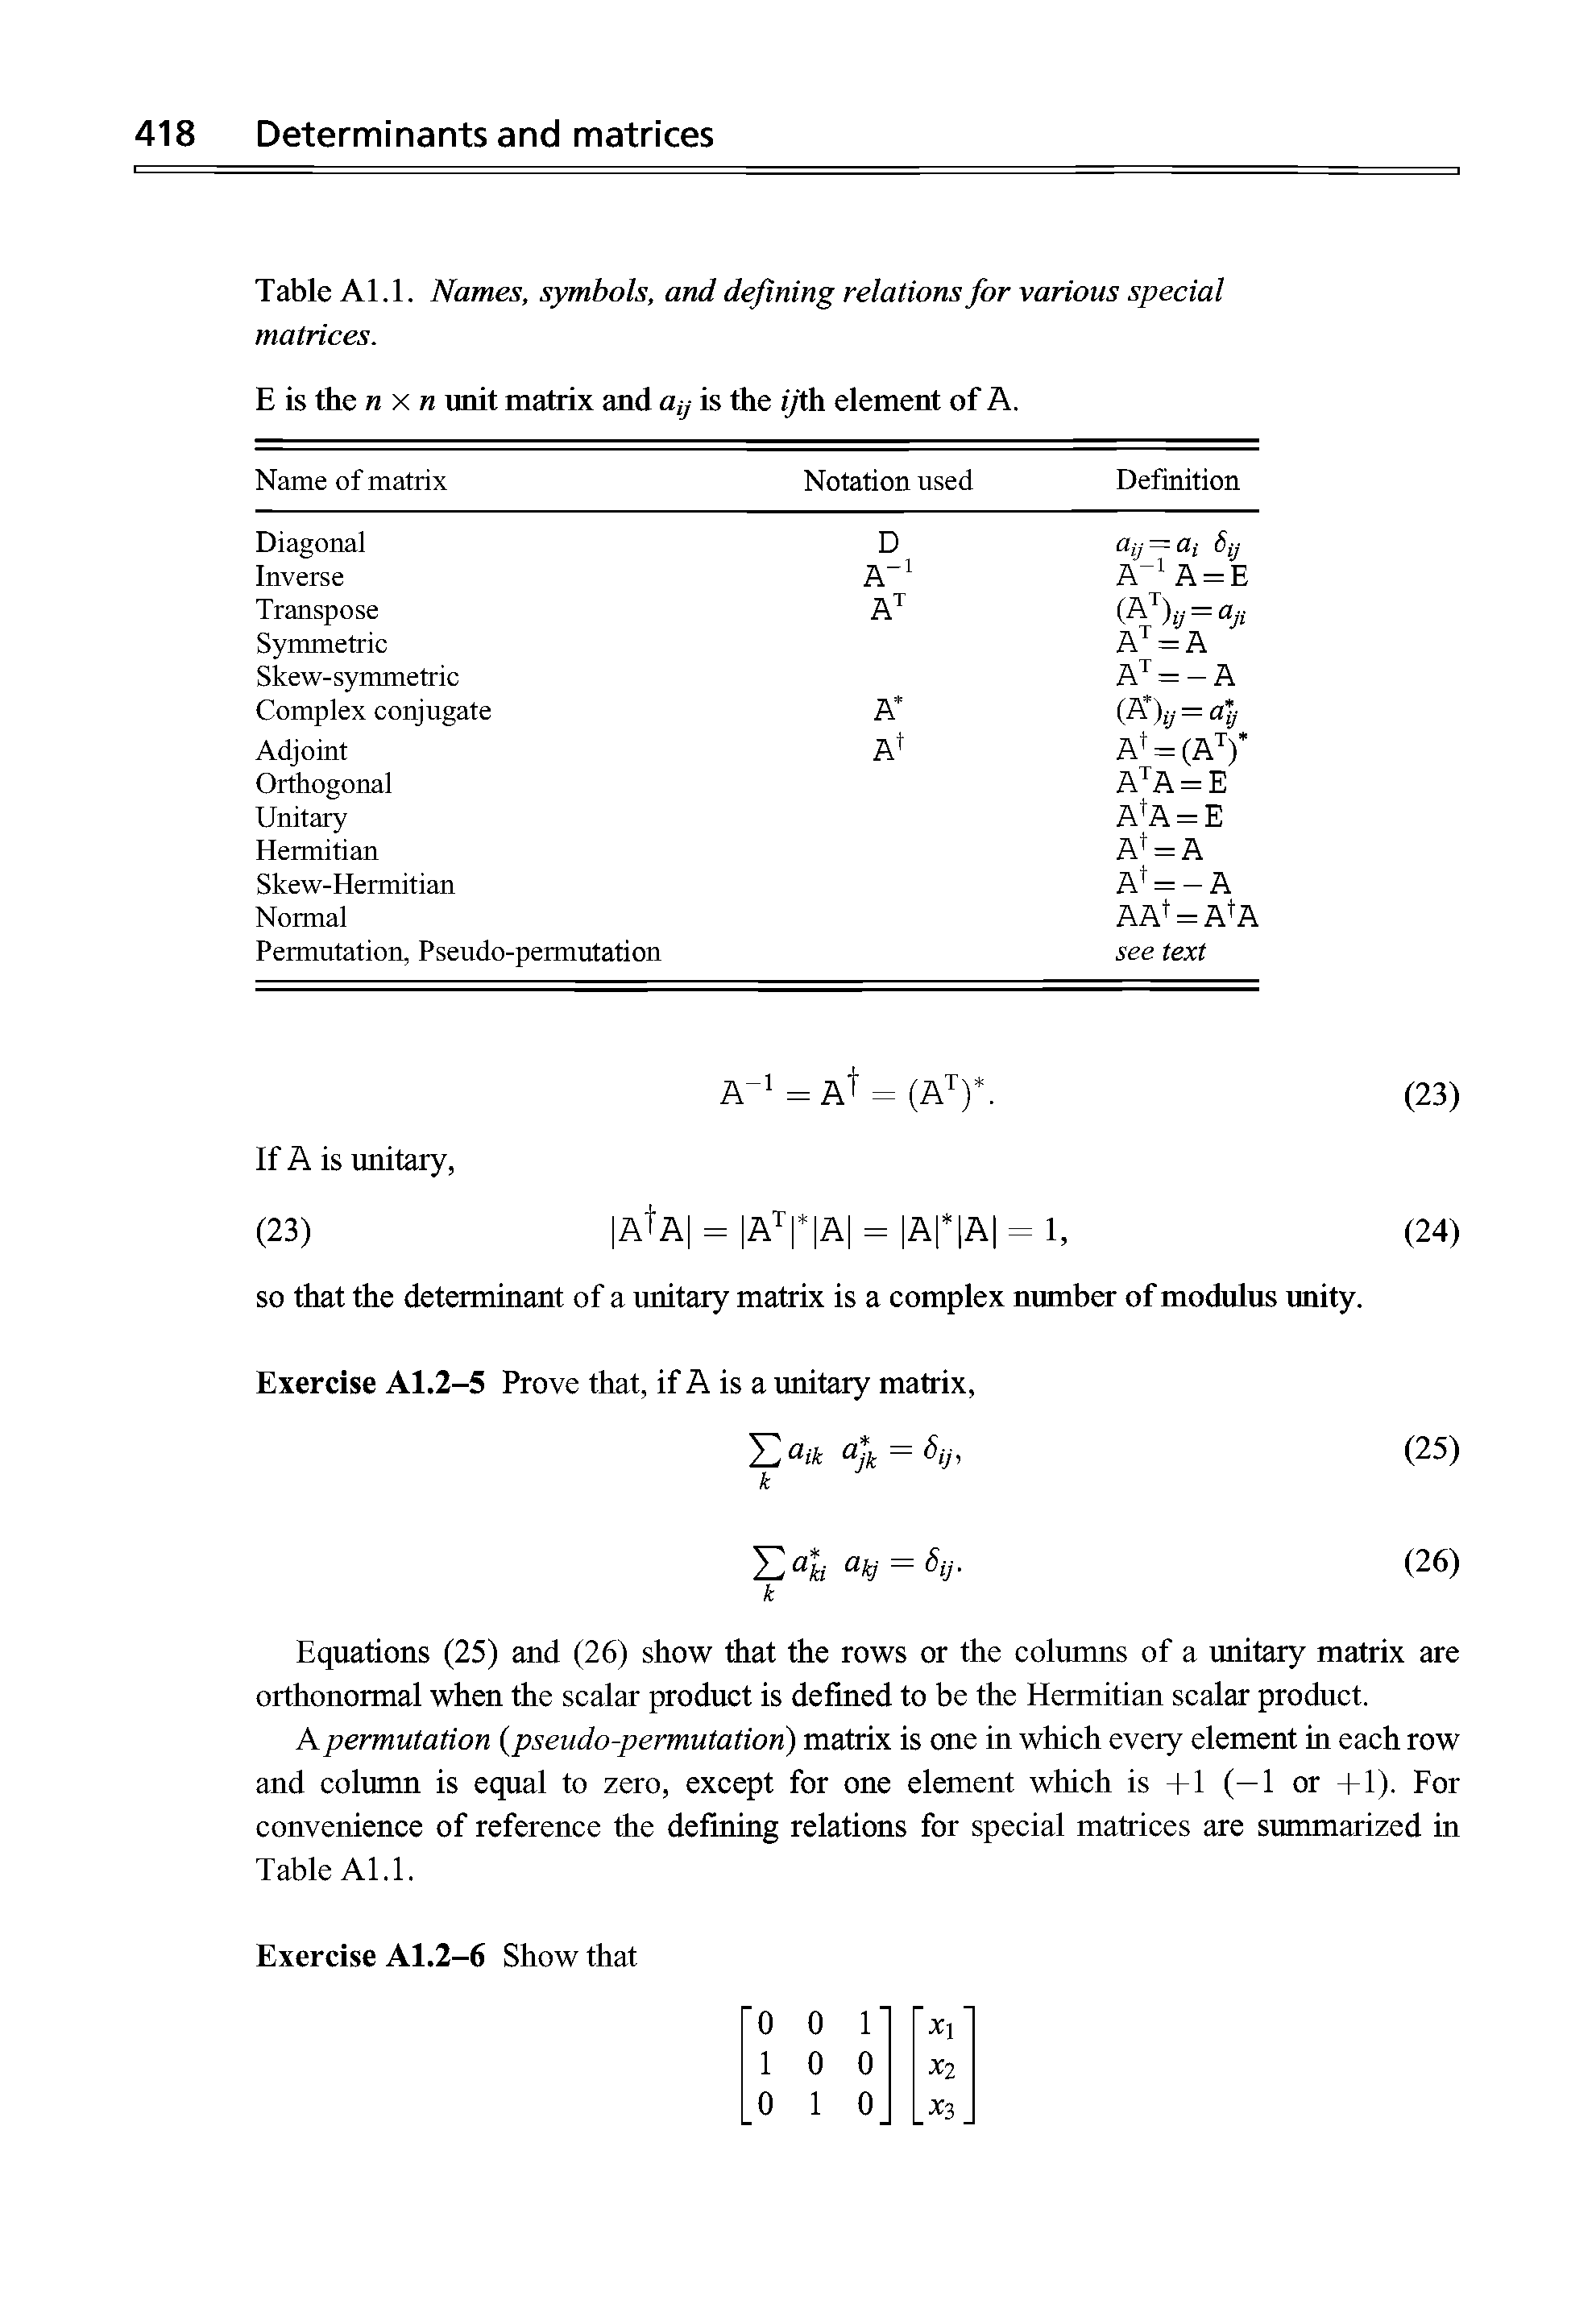 Table Al.l. Names, symbols, and defining relations for various special matrices.